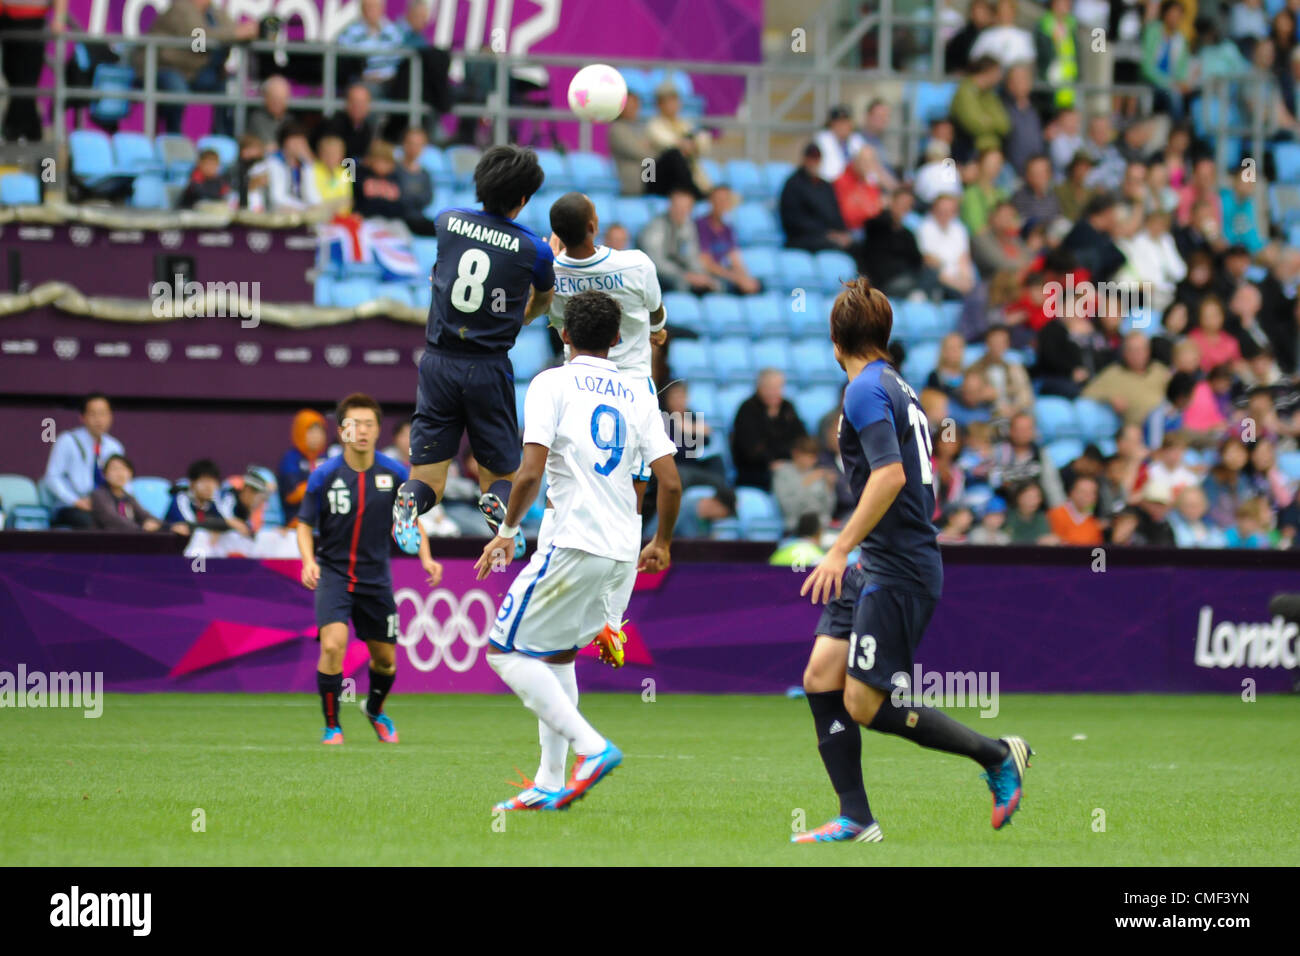 01.08.2012 Coventry, England. Kazuya YAMAMURA (Japan) and Jerry BENGTSON (Honduras) in action during the Olympic Football Men's Preliminary game between Japan and Honduras from the City of Coventry Stadium Stock Photo